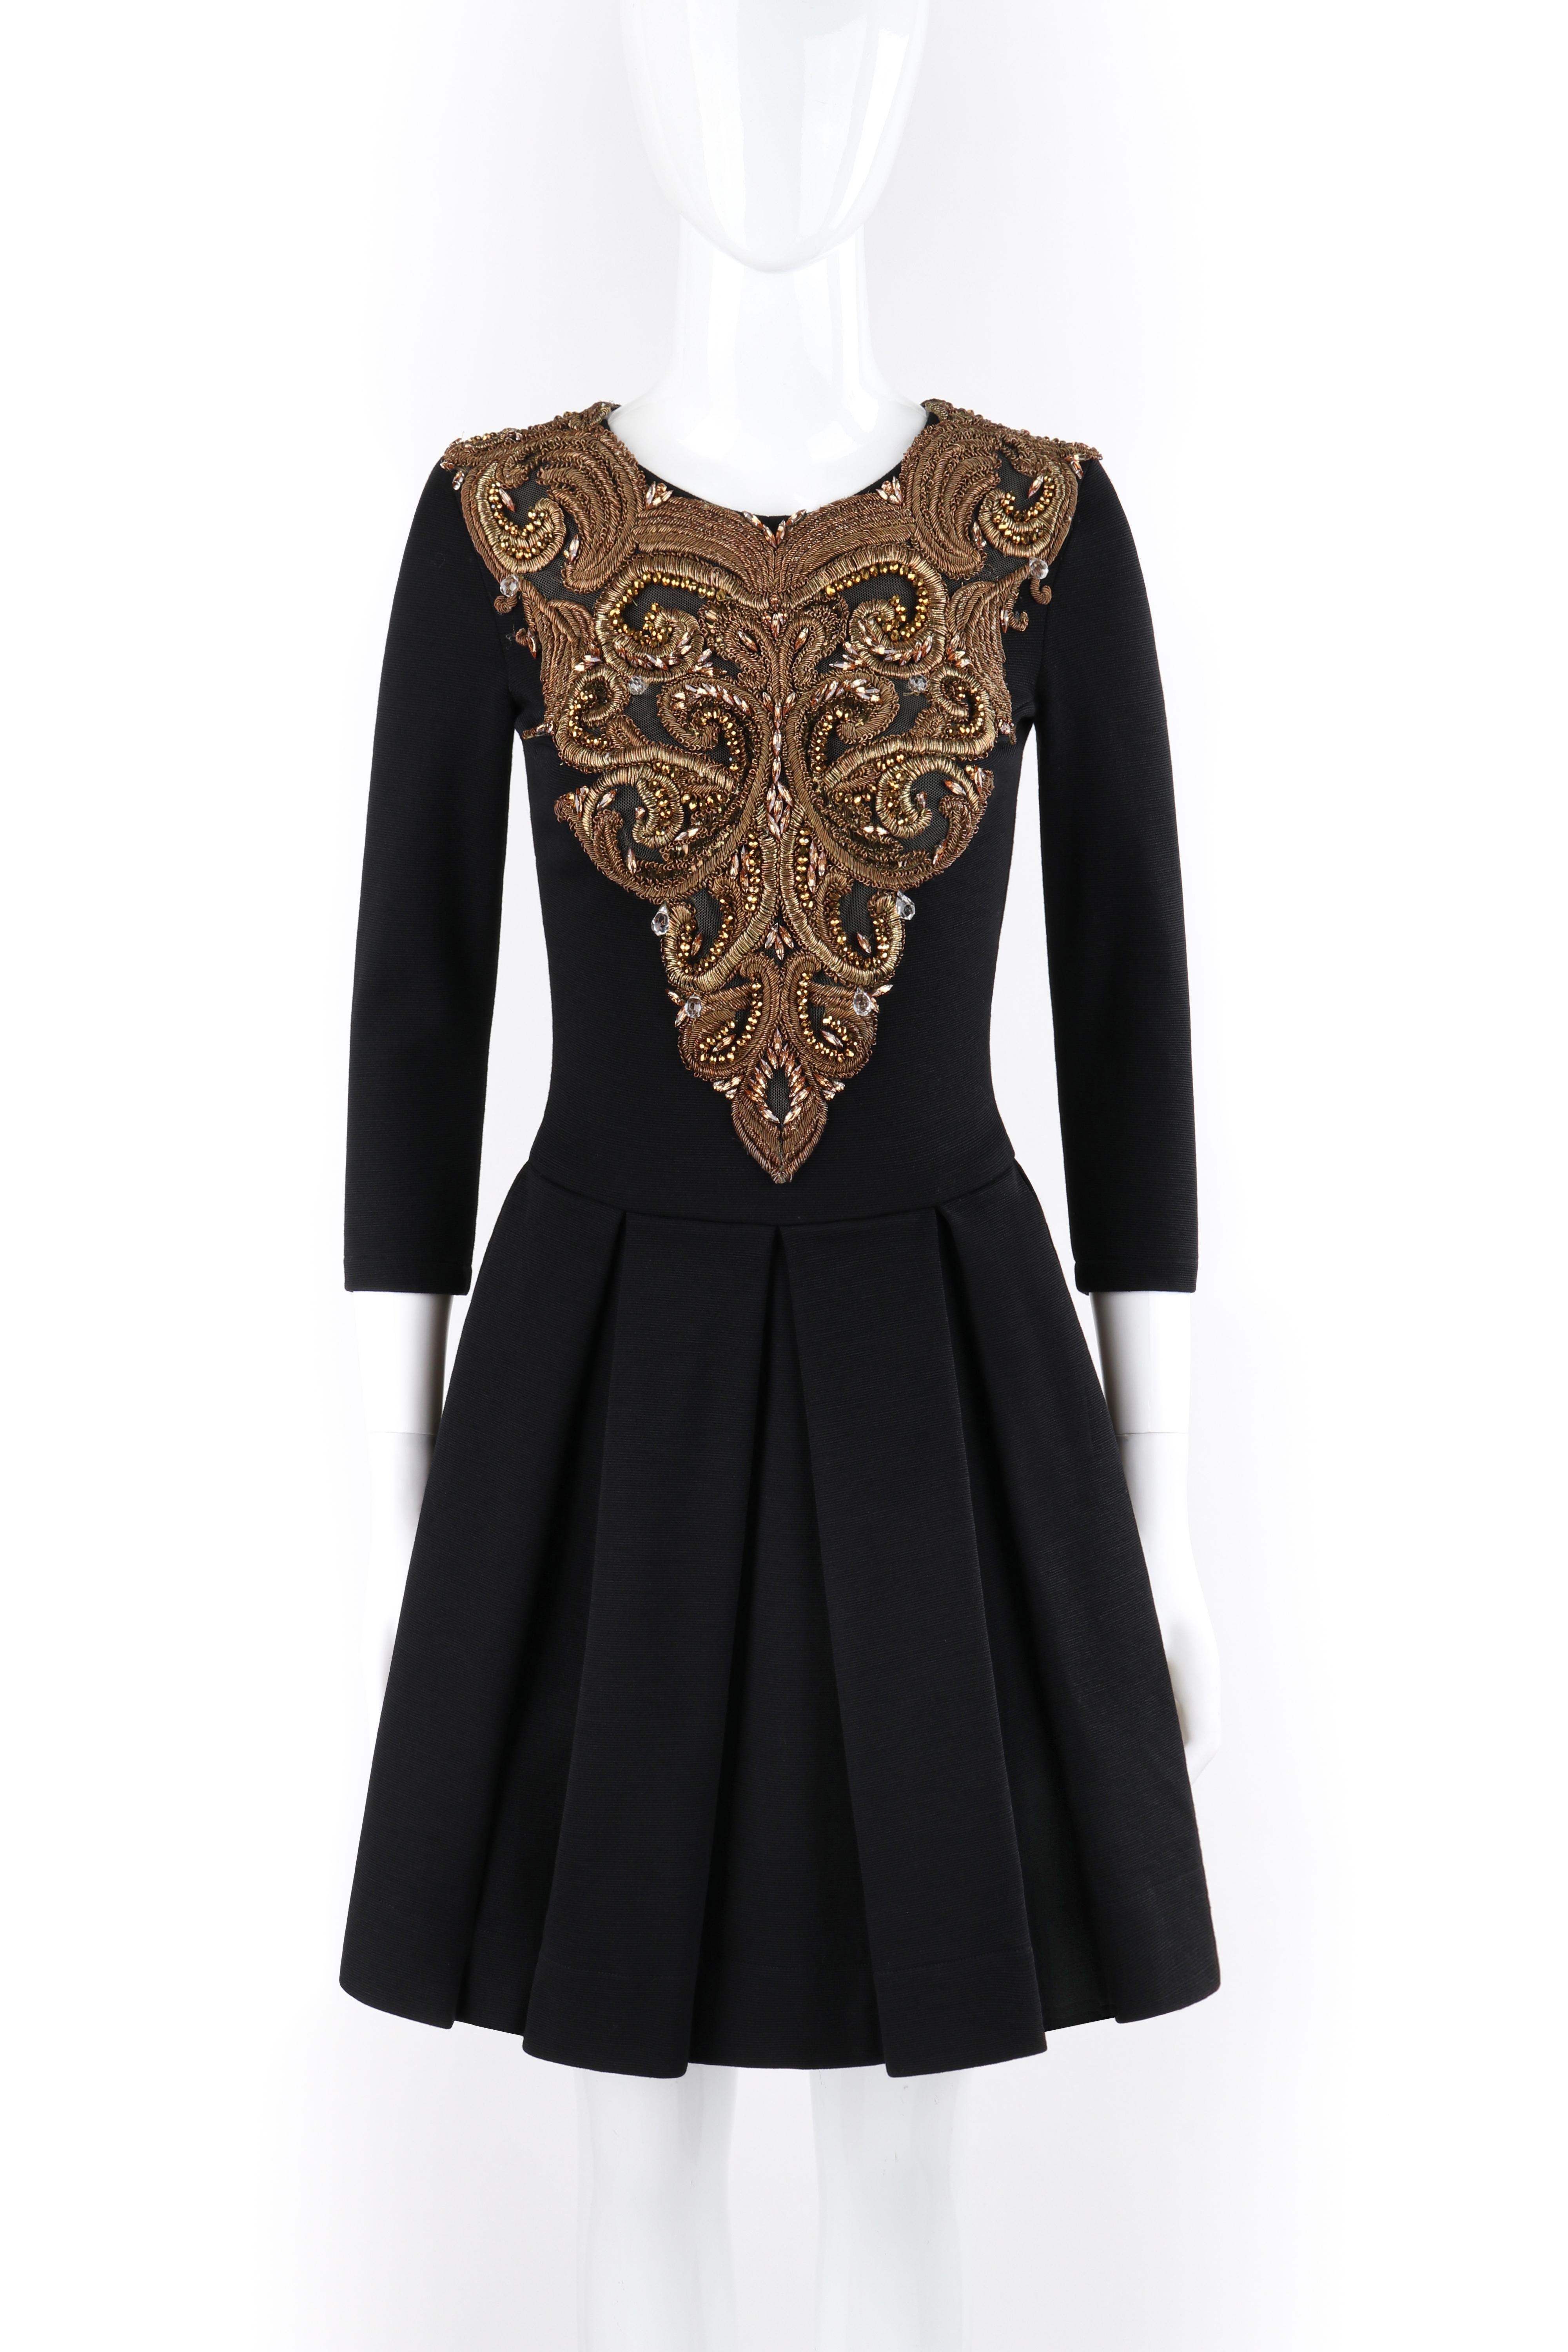 ALEXANDER McQUEEN A/W 2010 “Angels & Demons” Black Gold Beaded Fit n Flare Dress
 
Brand / Manufacturer: Alexander McQueen
Collection: A/W 2010 “Angels & Demons” 
Designer: Alexander McQueen 
Style: Fit ‘n flare dress
Color(s): Shades of black,